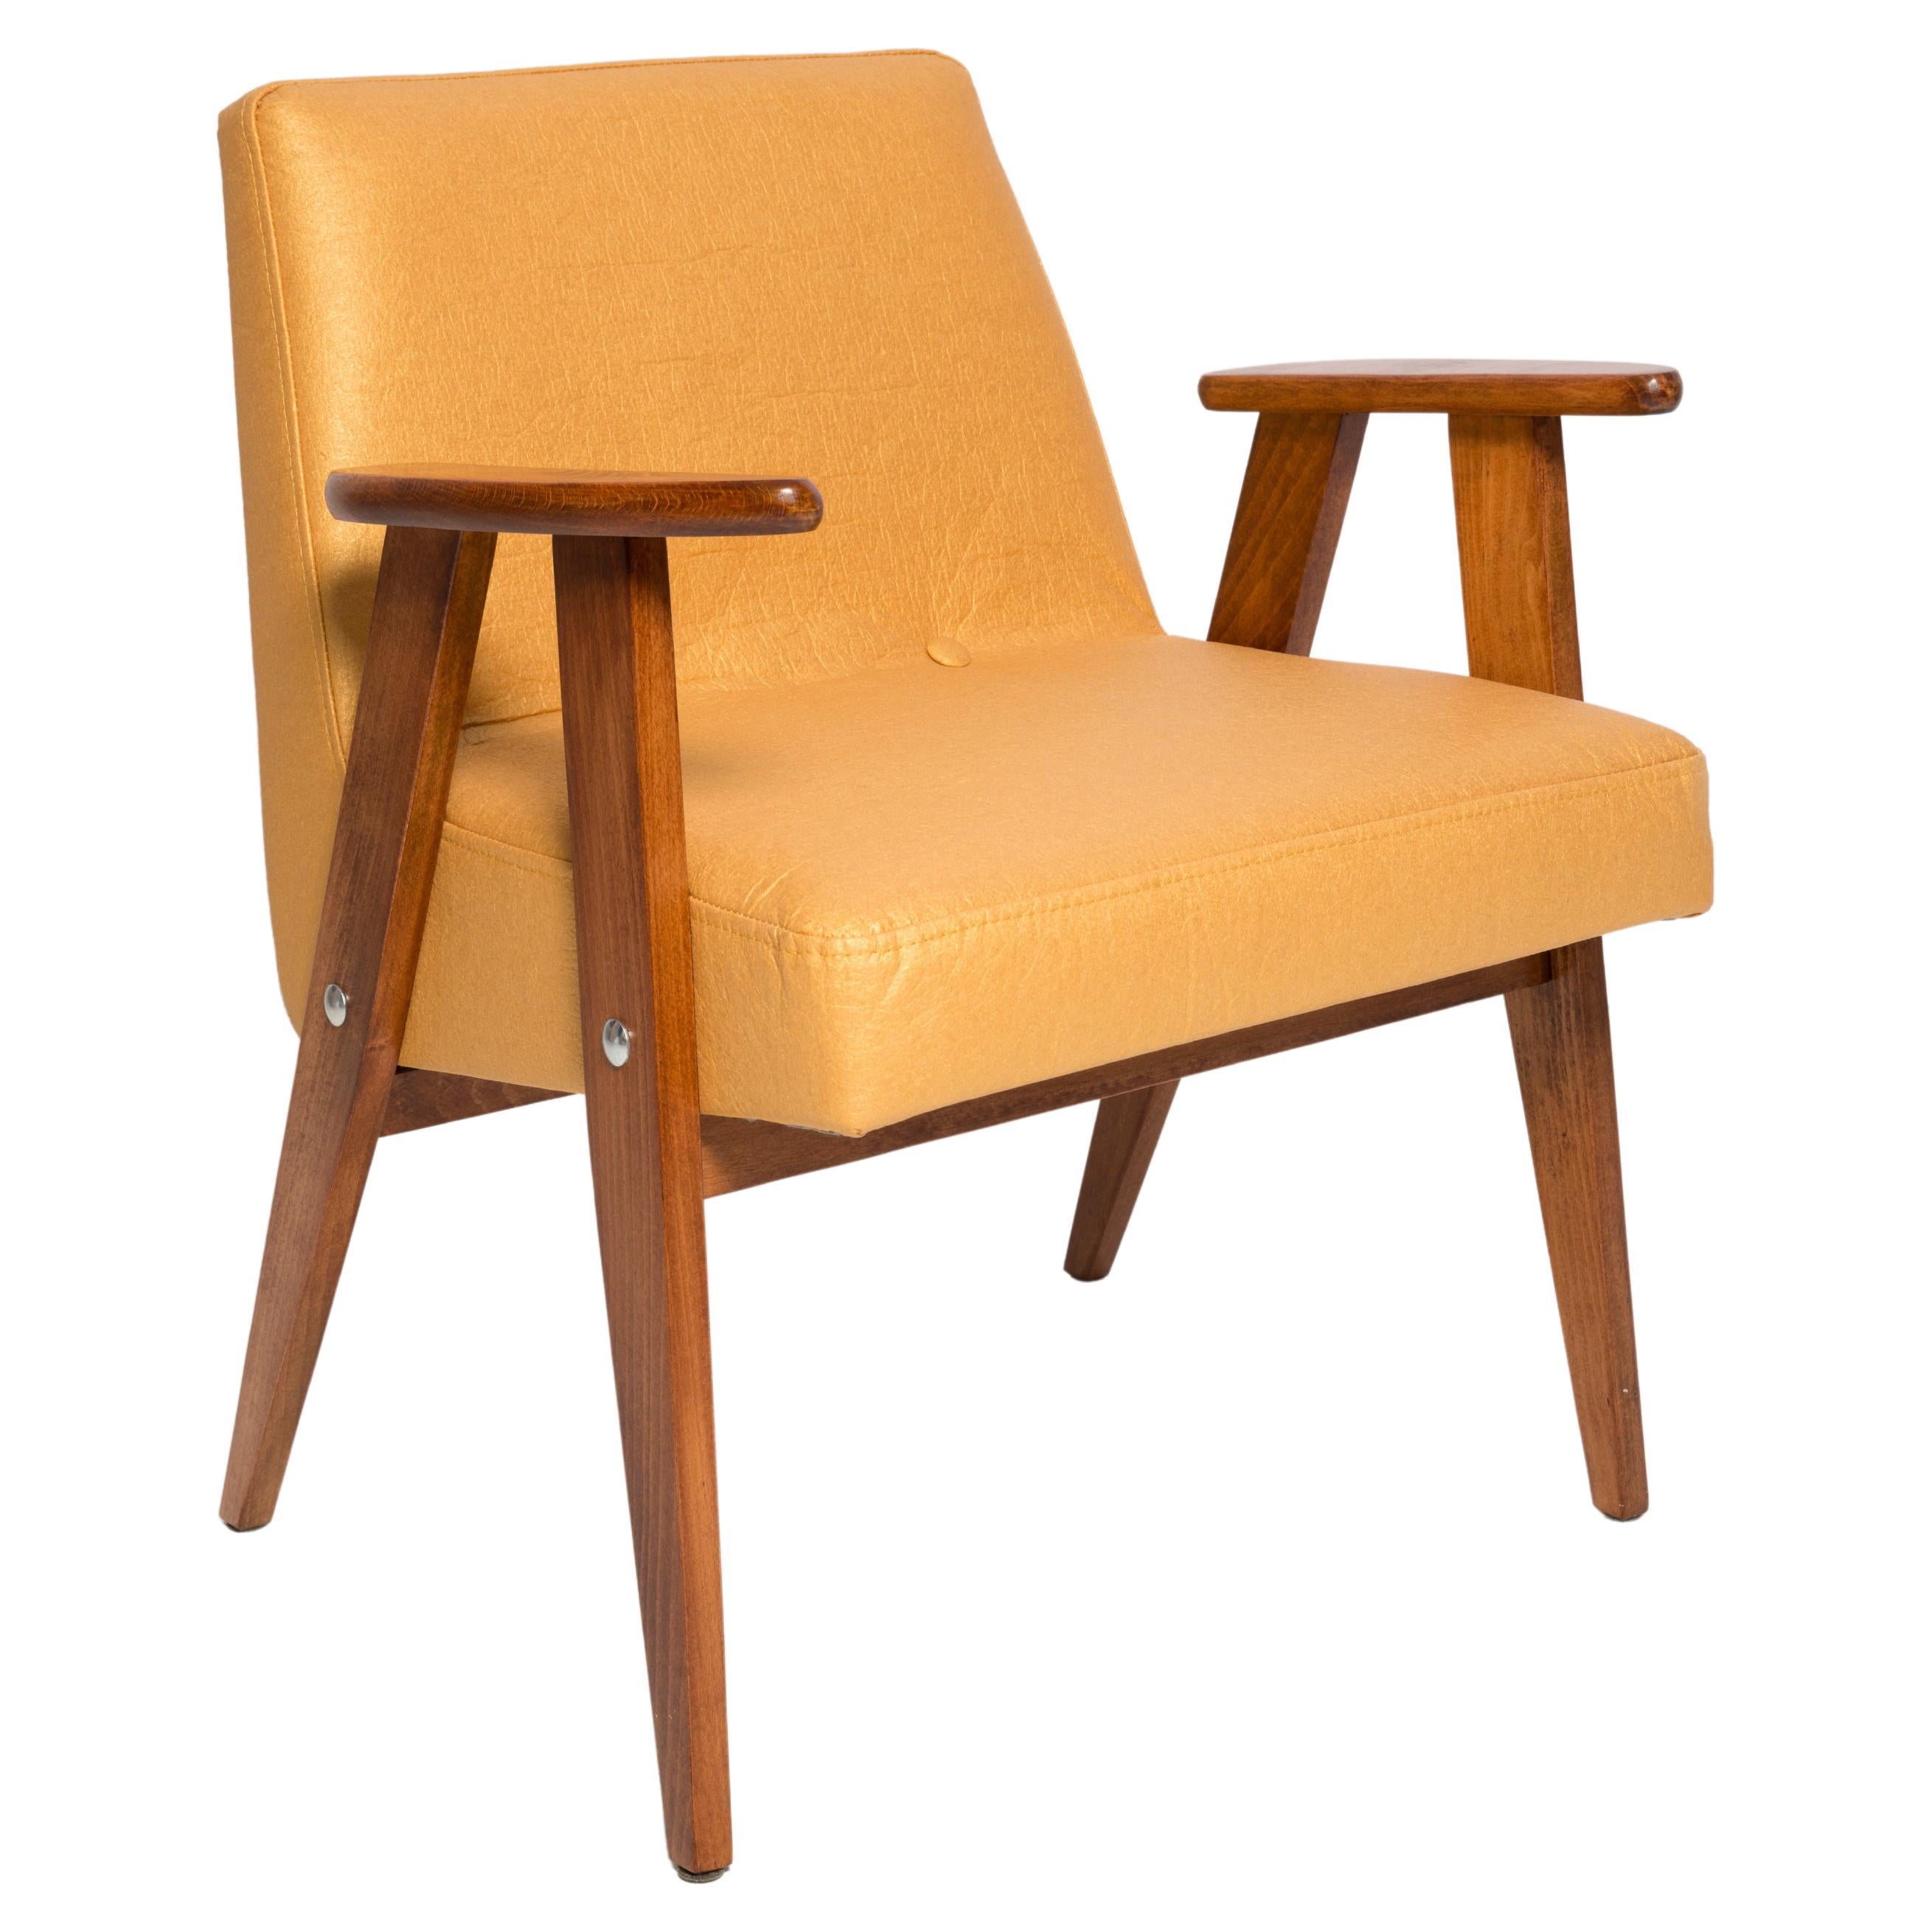 Midcentury 366 Club Armchair in Gold Pineapple Leather, Jozef Chierowski, 1960s For Sale